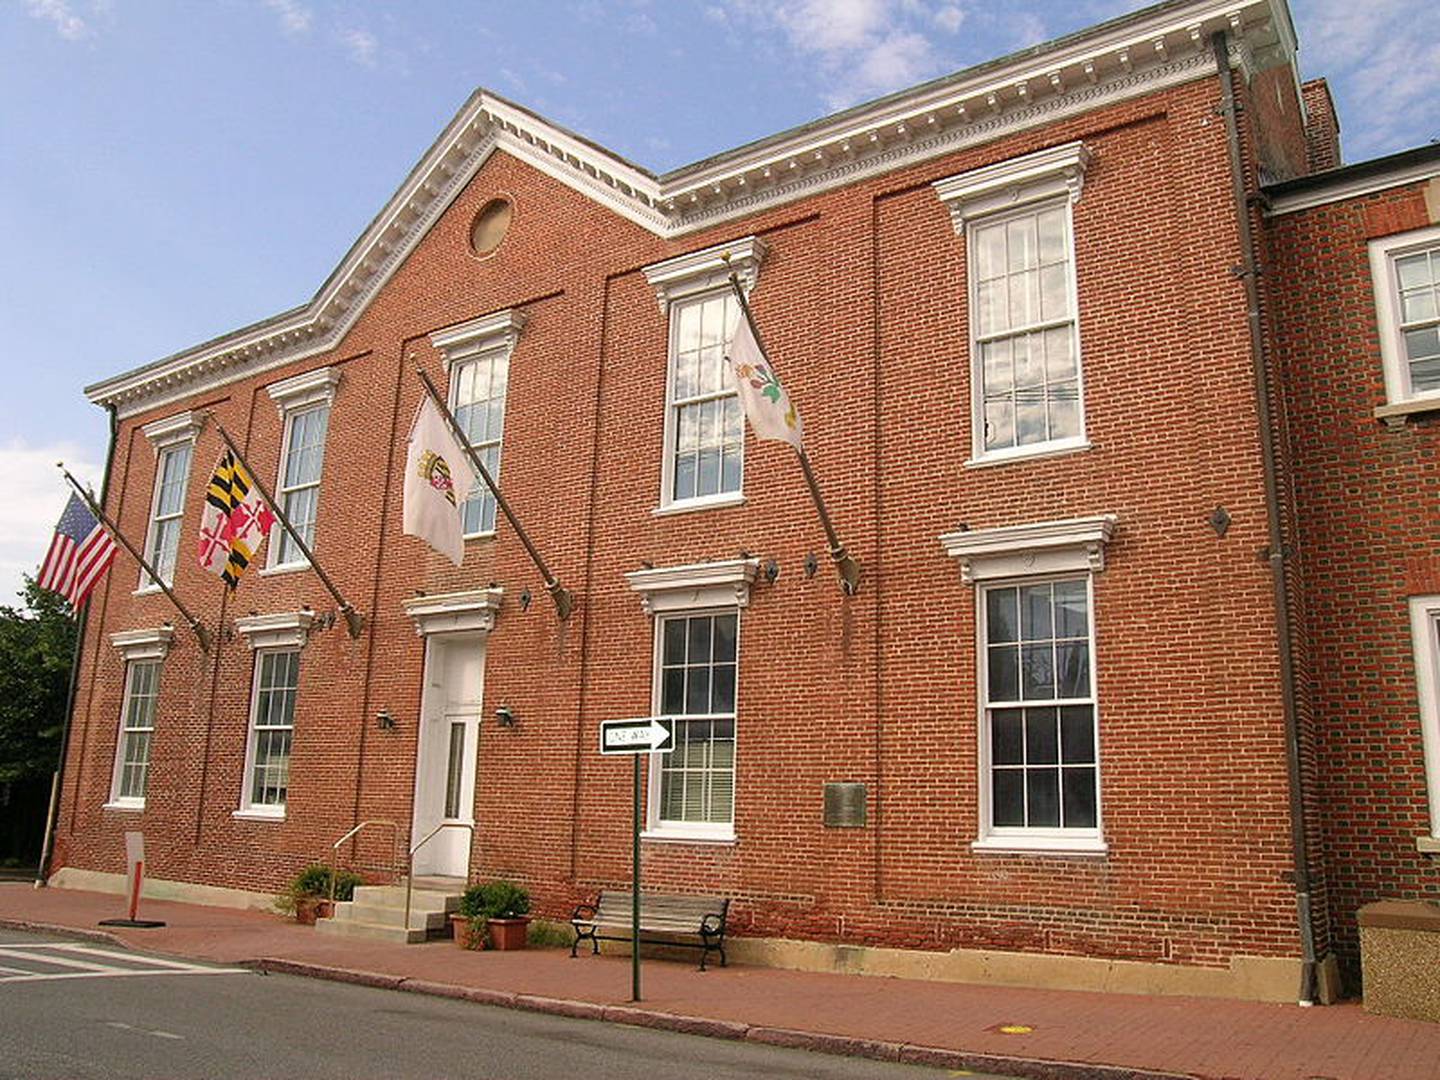 Annapolis City Hall has long kept the Housing Authority of the City of Annapolis at arms length.